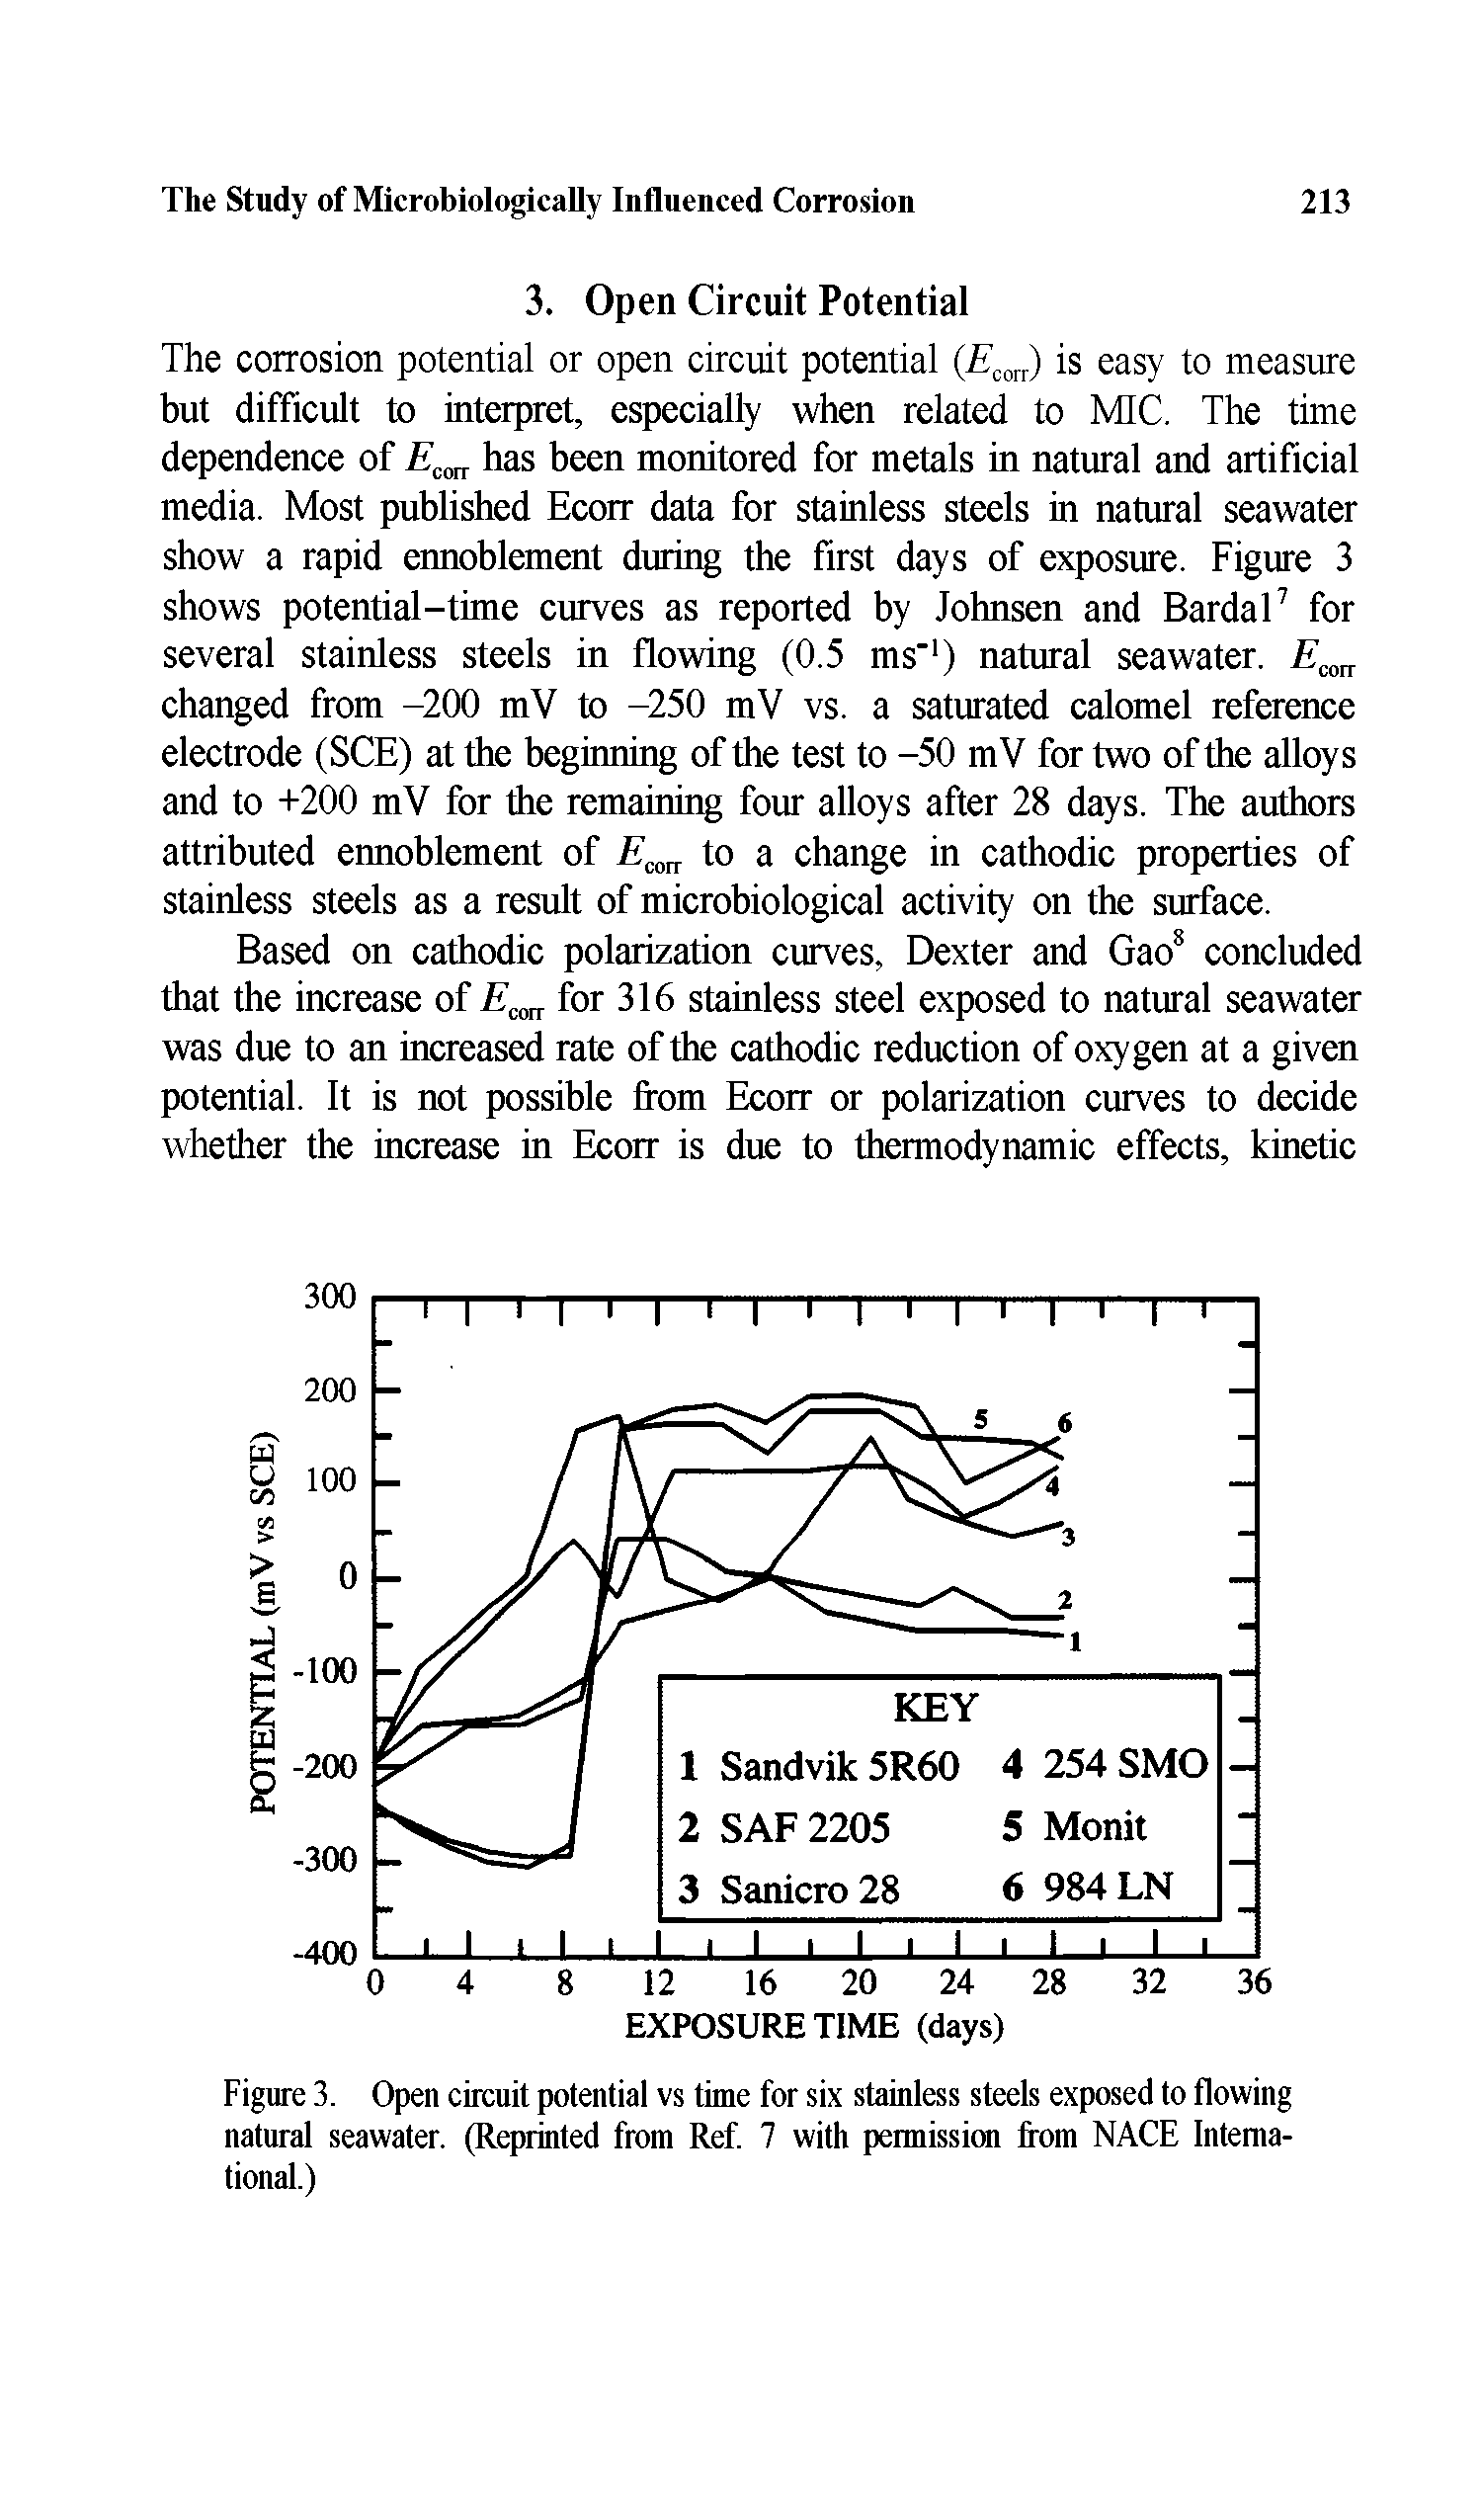 Figure 3. Open circuit potential vs time for six stainless steels exposed to flowing natural seawater. (Reprinted from Ref. 7 with permission from NACE International.)...